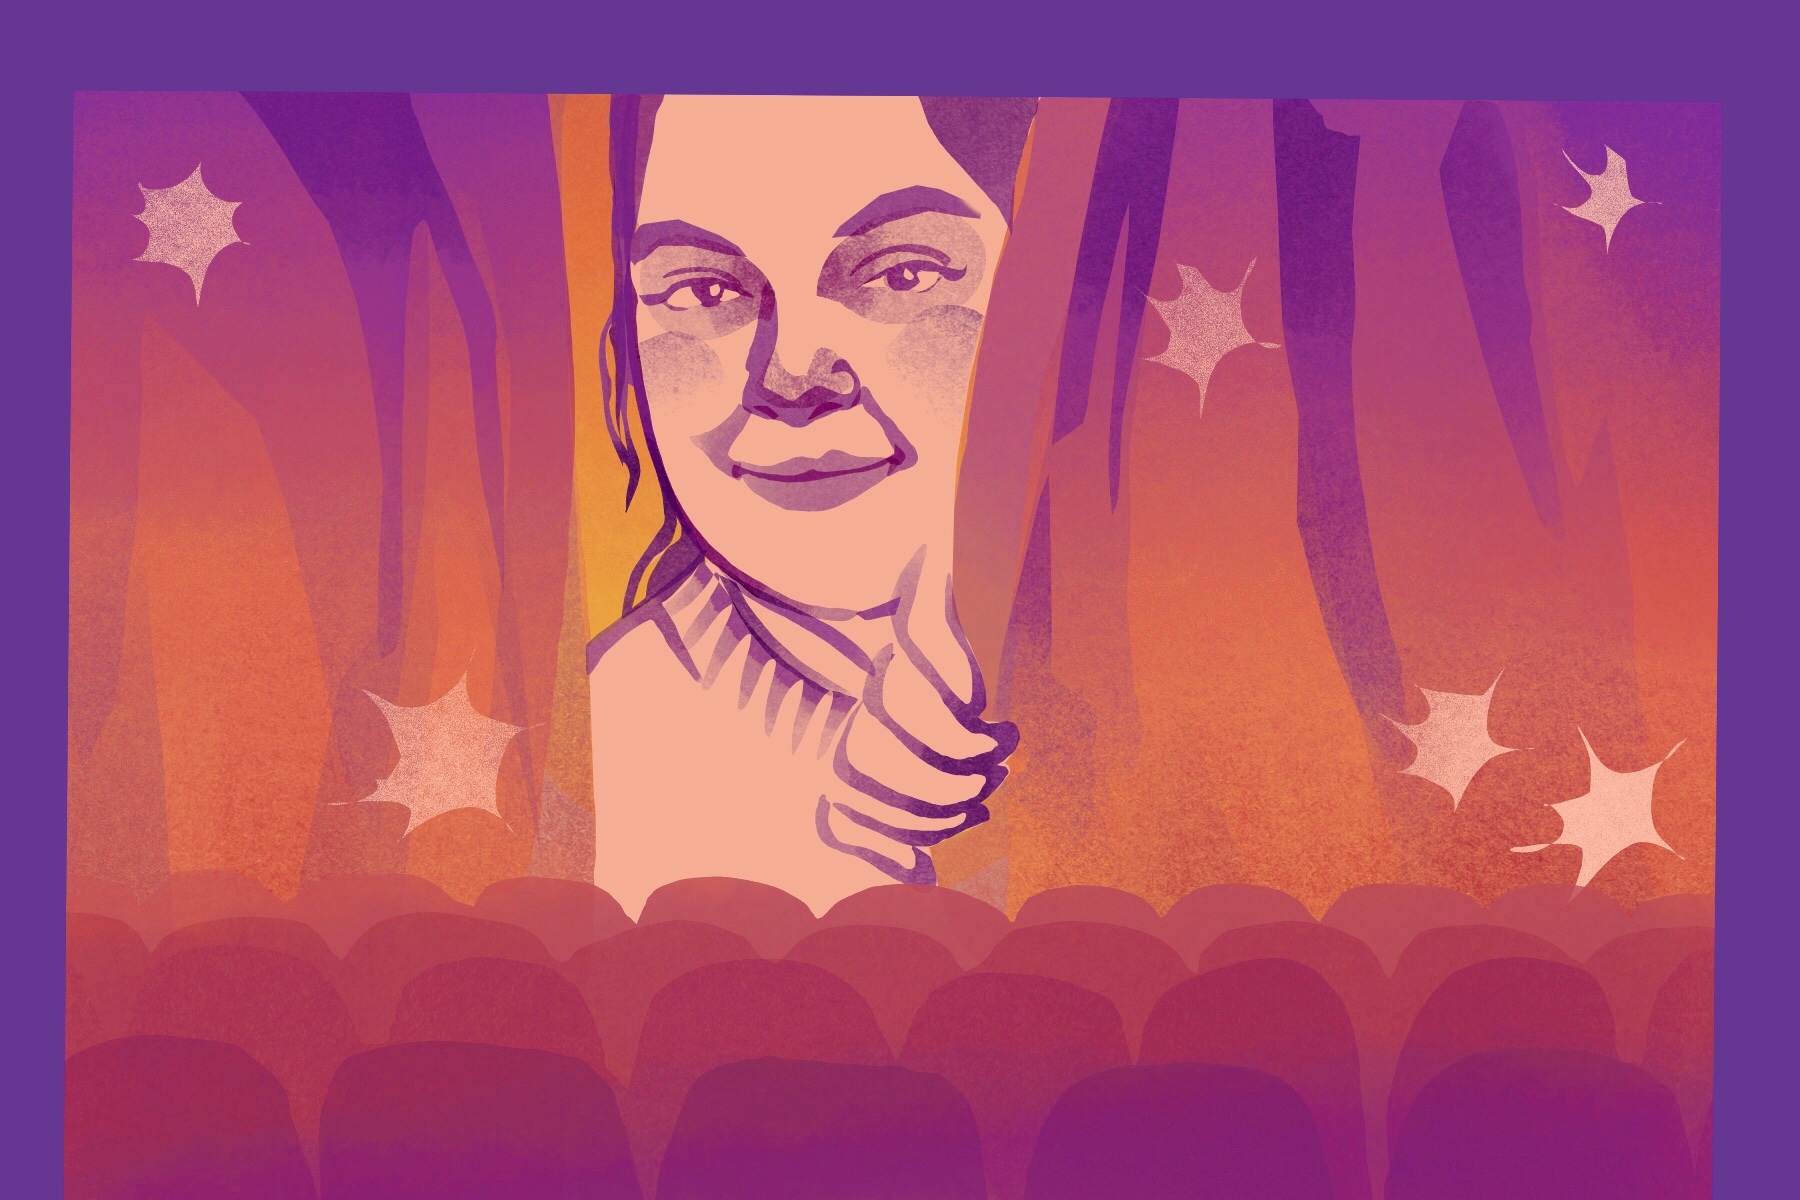 In an article about main character syndrome, a girl peeks out from behind a theater curtain.